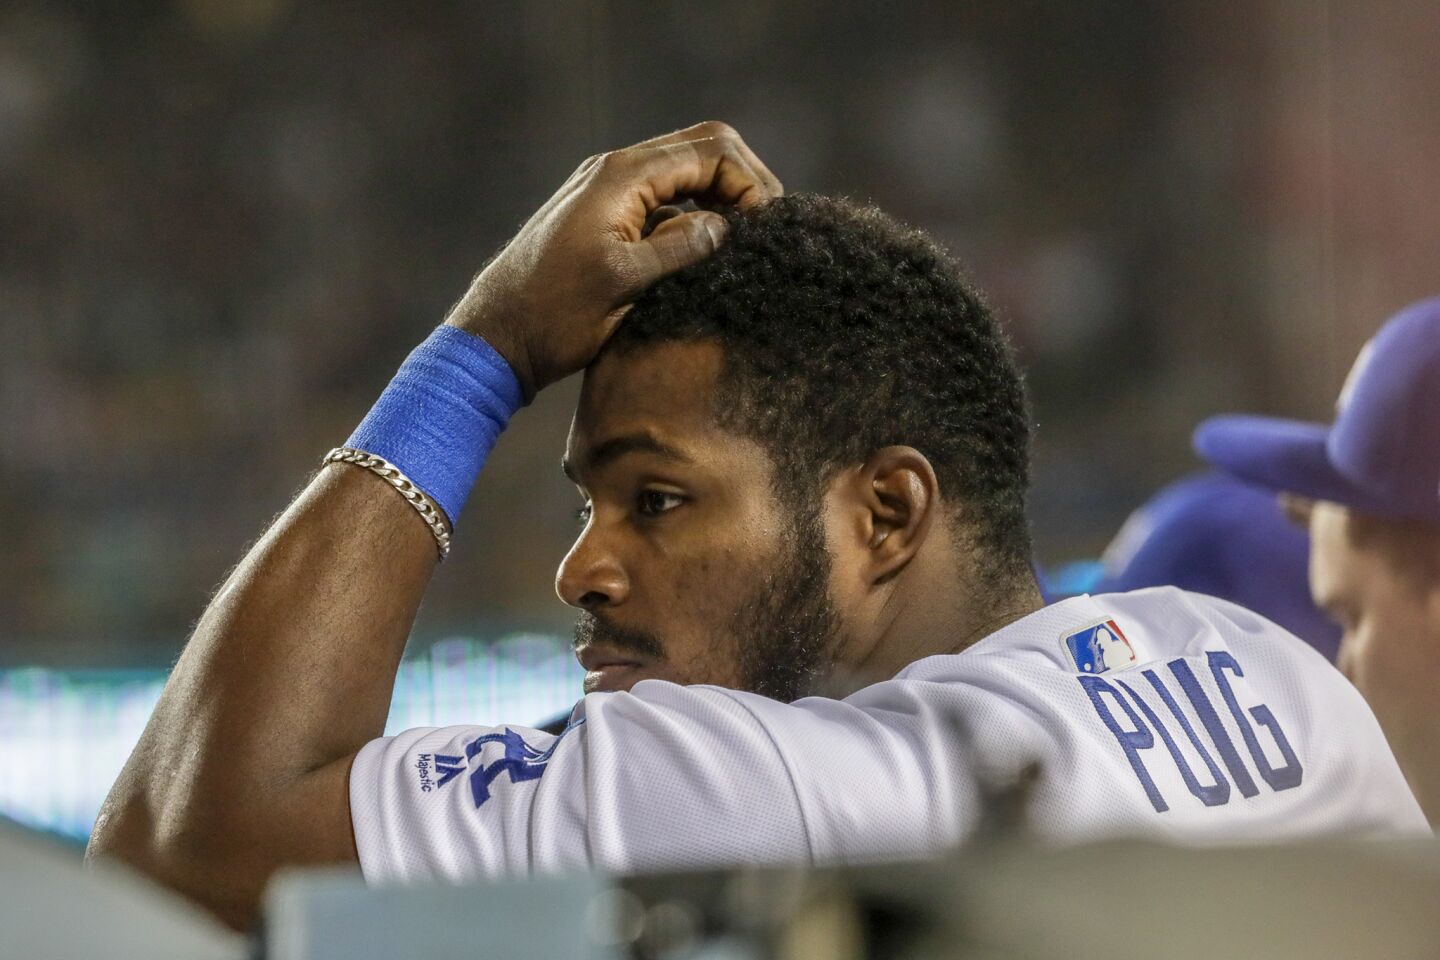 Dodgers' Yasiel Puig looks on from the bench as the Red Sox carry a 5-1 lead late in Game 5.